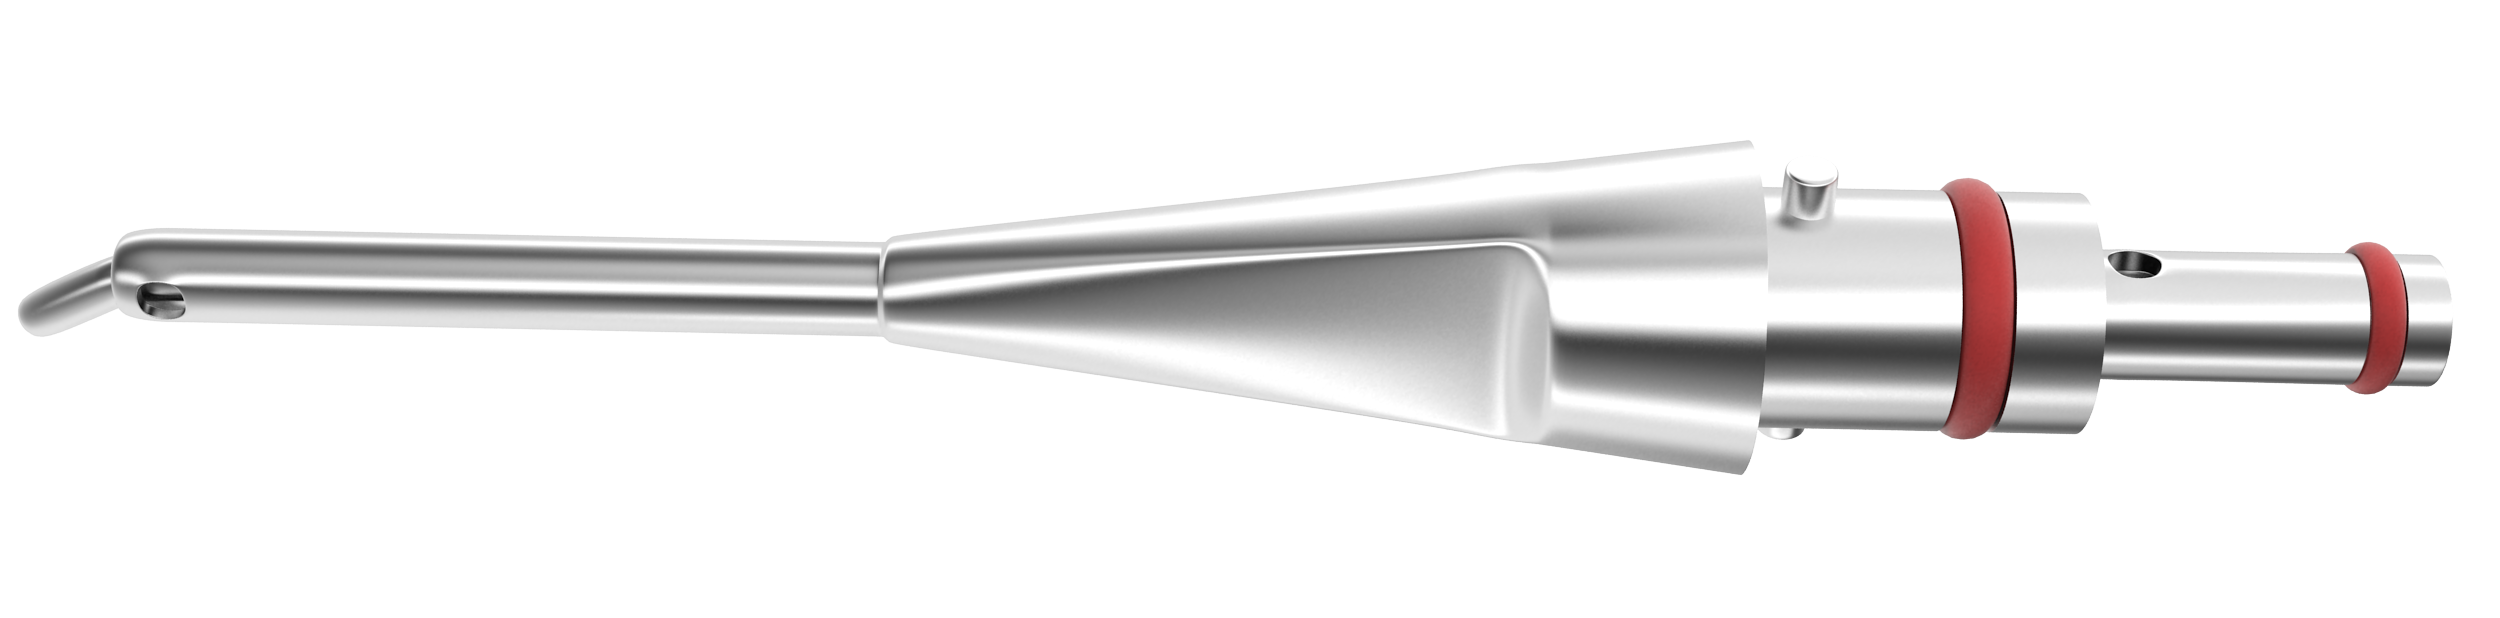 719R 7-080/20 Thornton 20° Angled I/A Tip, Stainless Steel